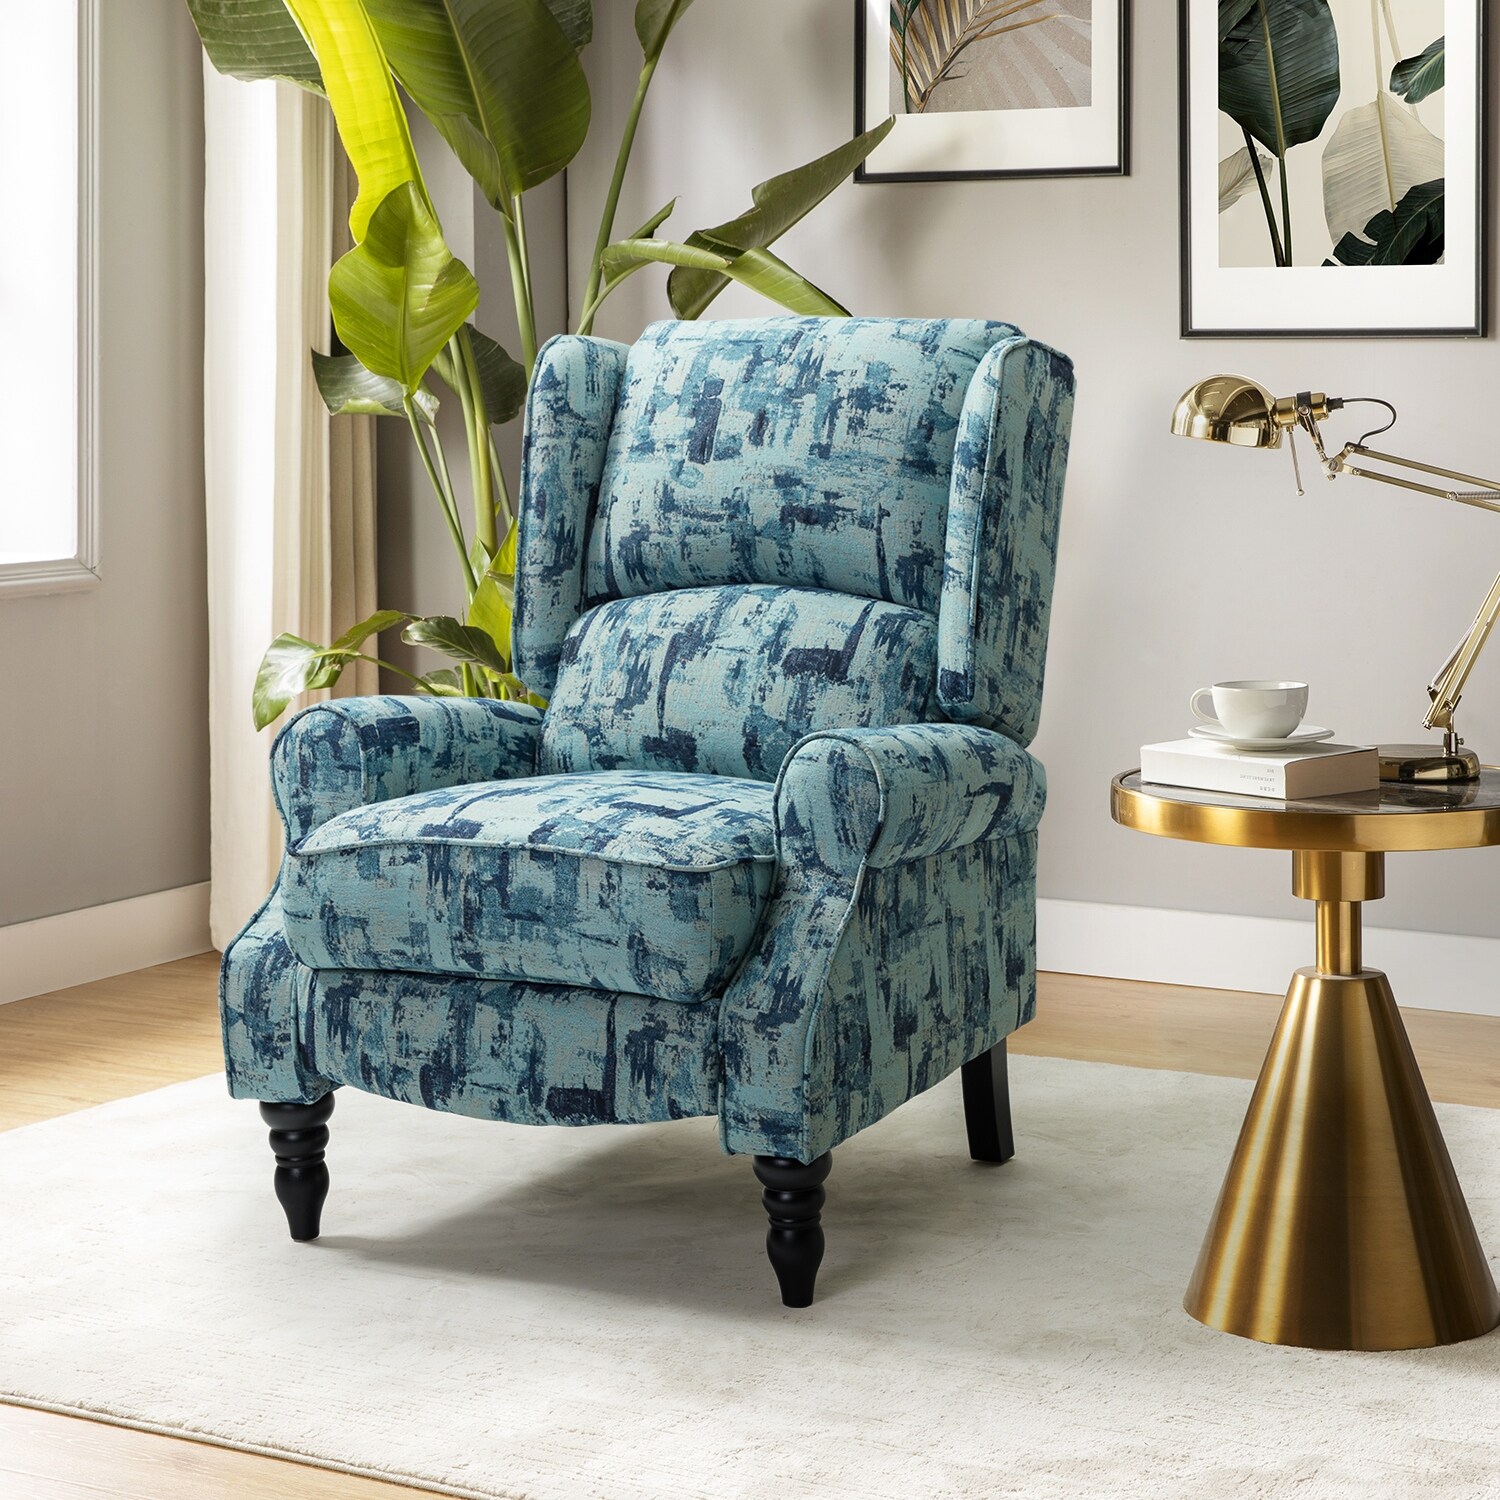 https://ak1.ostkcdn.com/images/products/is/images/direct/7701e5cc366e7e762c2d23c93cdfde09c91688ad/Olympus-Upholstered-Classic-Manual-Wingback-Recliner-with-Spindle-Legs-by-HULALA-HOME.jpg